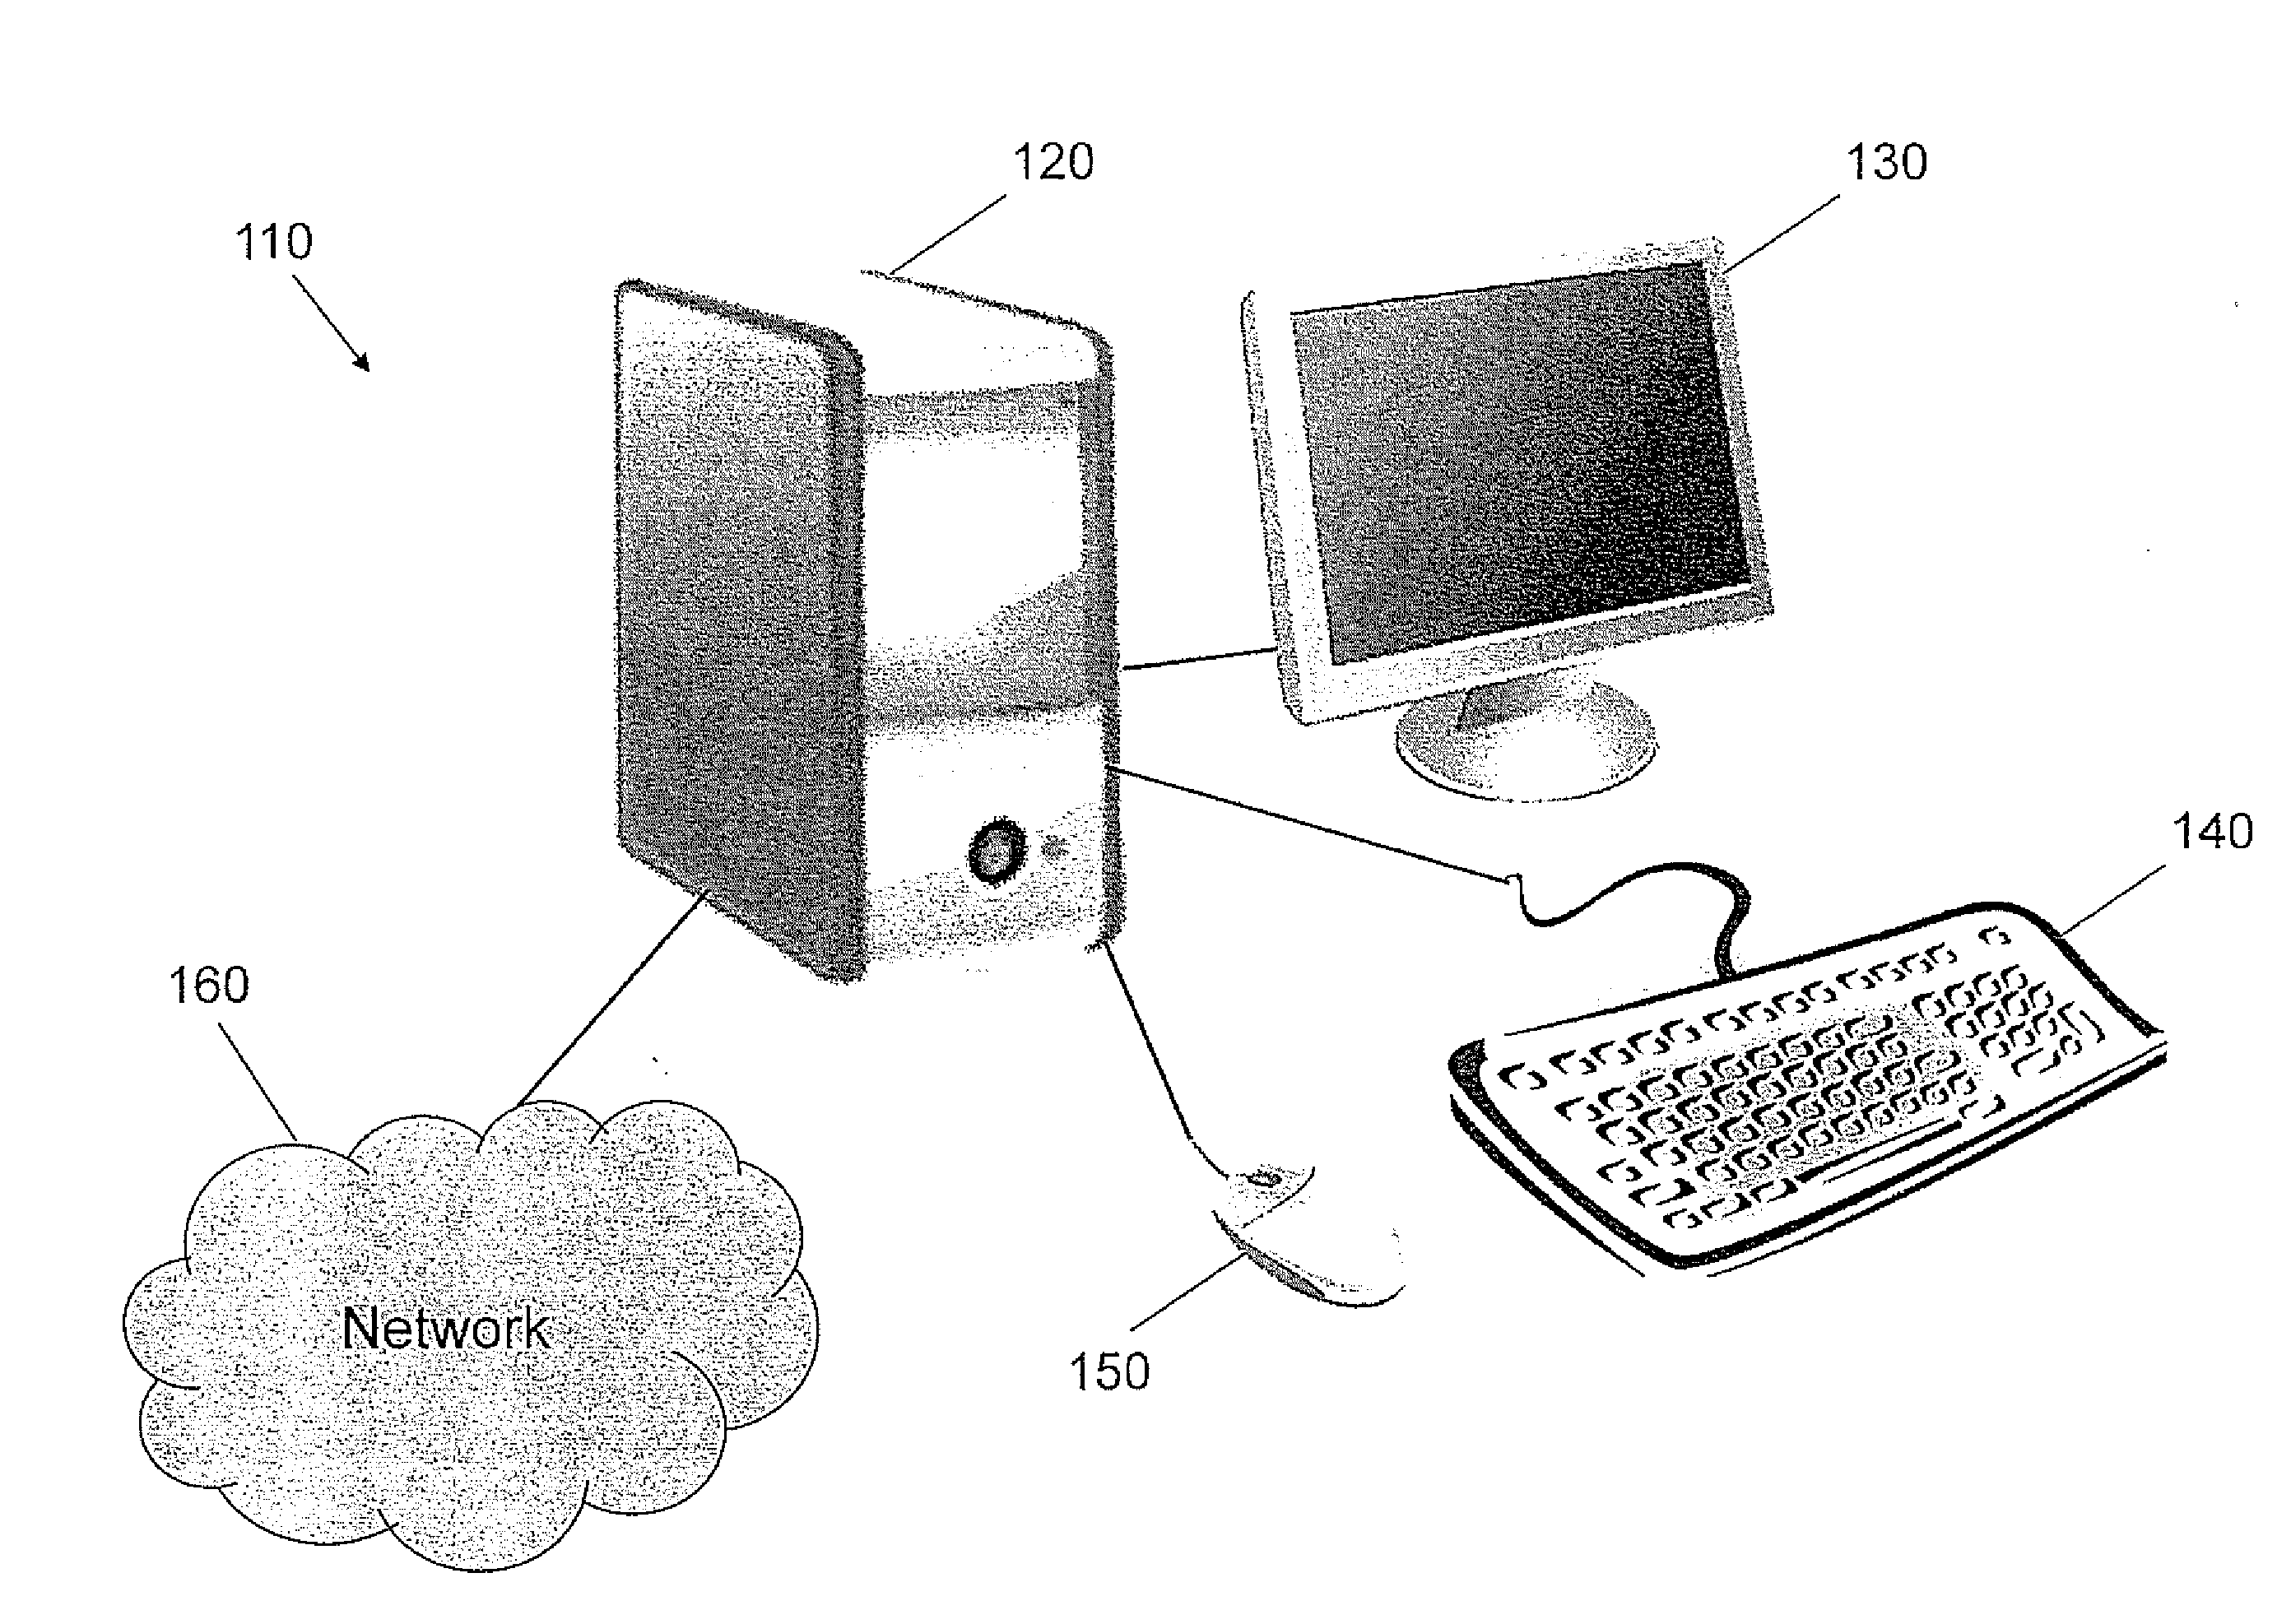 System and method of electronic searching and shopping carts